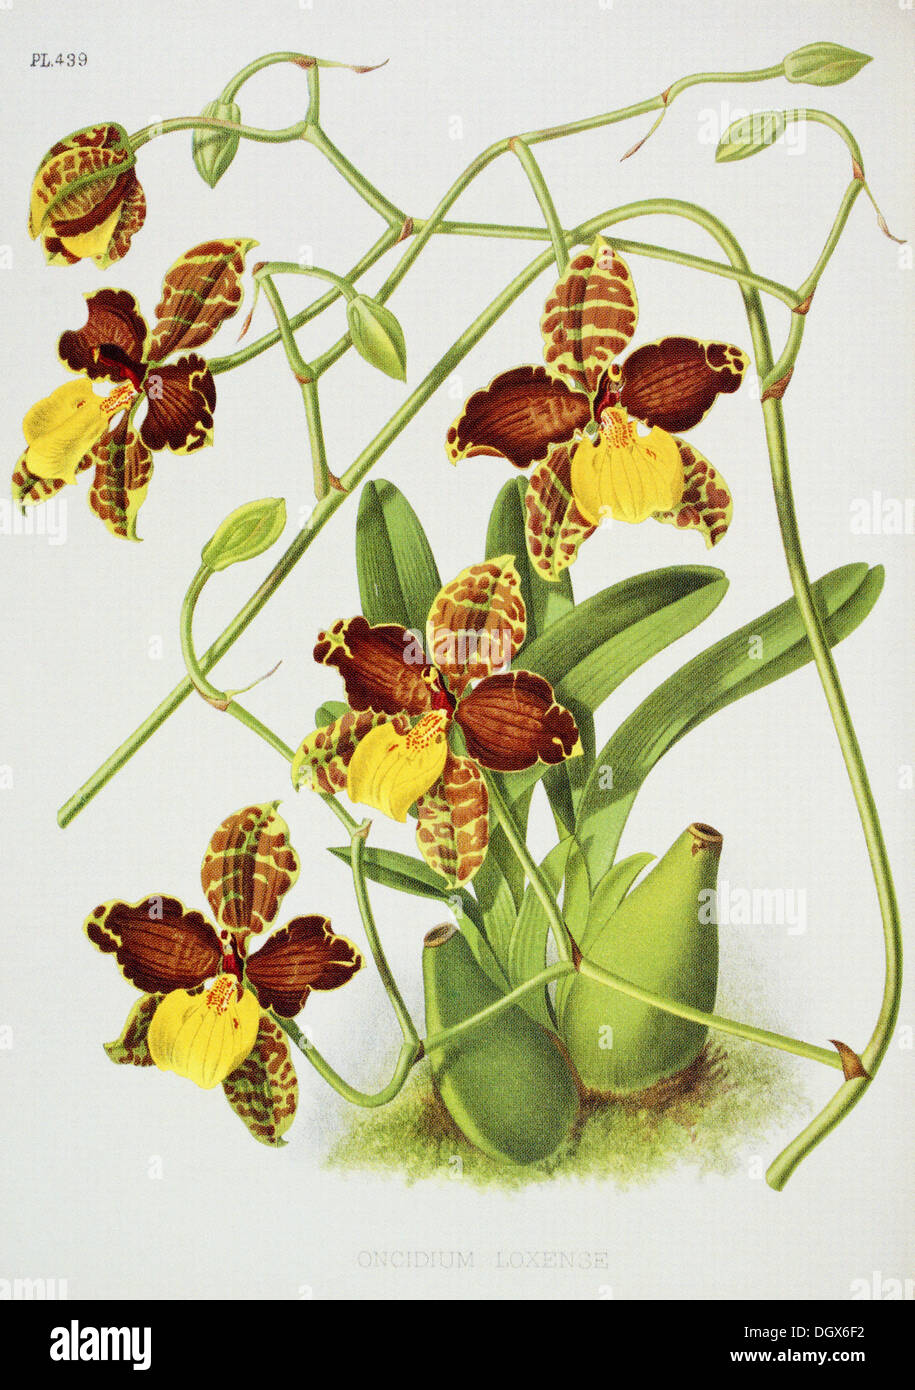 Orchids, Oncidium loxense - by John N. Fitch, 1893 Stock Photo